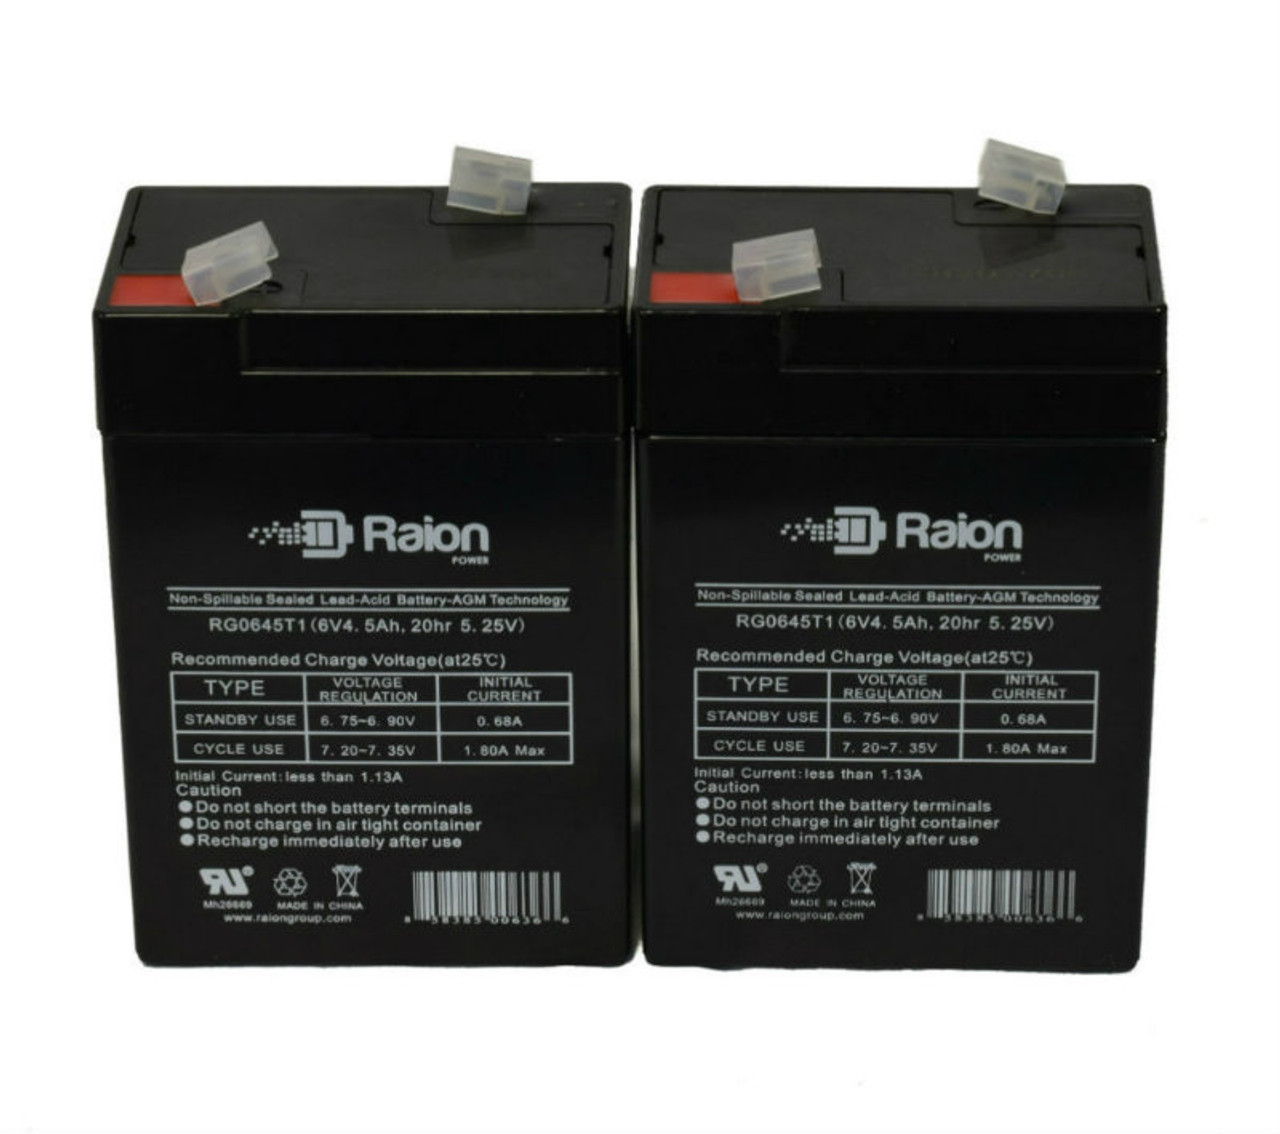 Raion Power RG0645T1 6V 4.5Ah Replacement Medical Equipment Battery for B. Braun Micro Rate Infusion Pump - 2 Pack